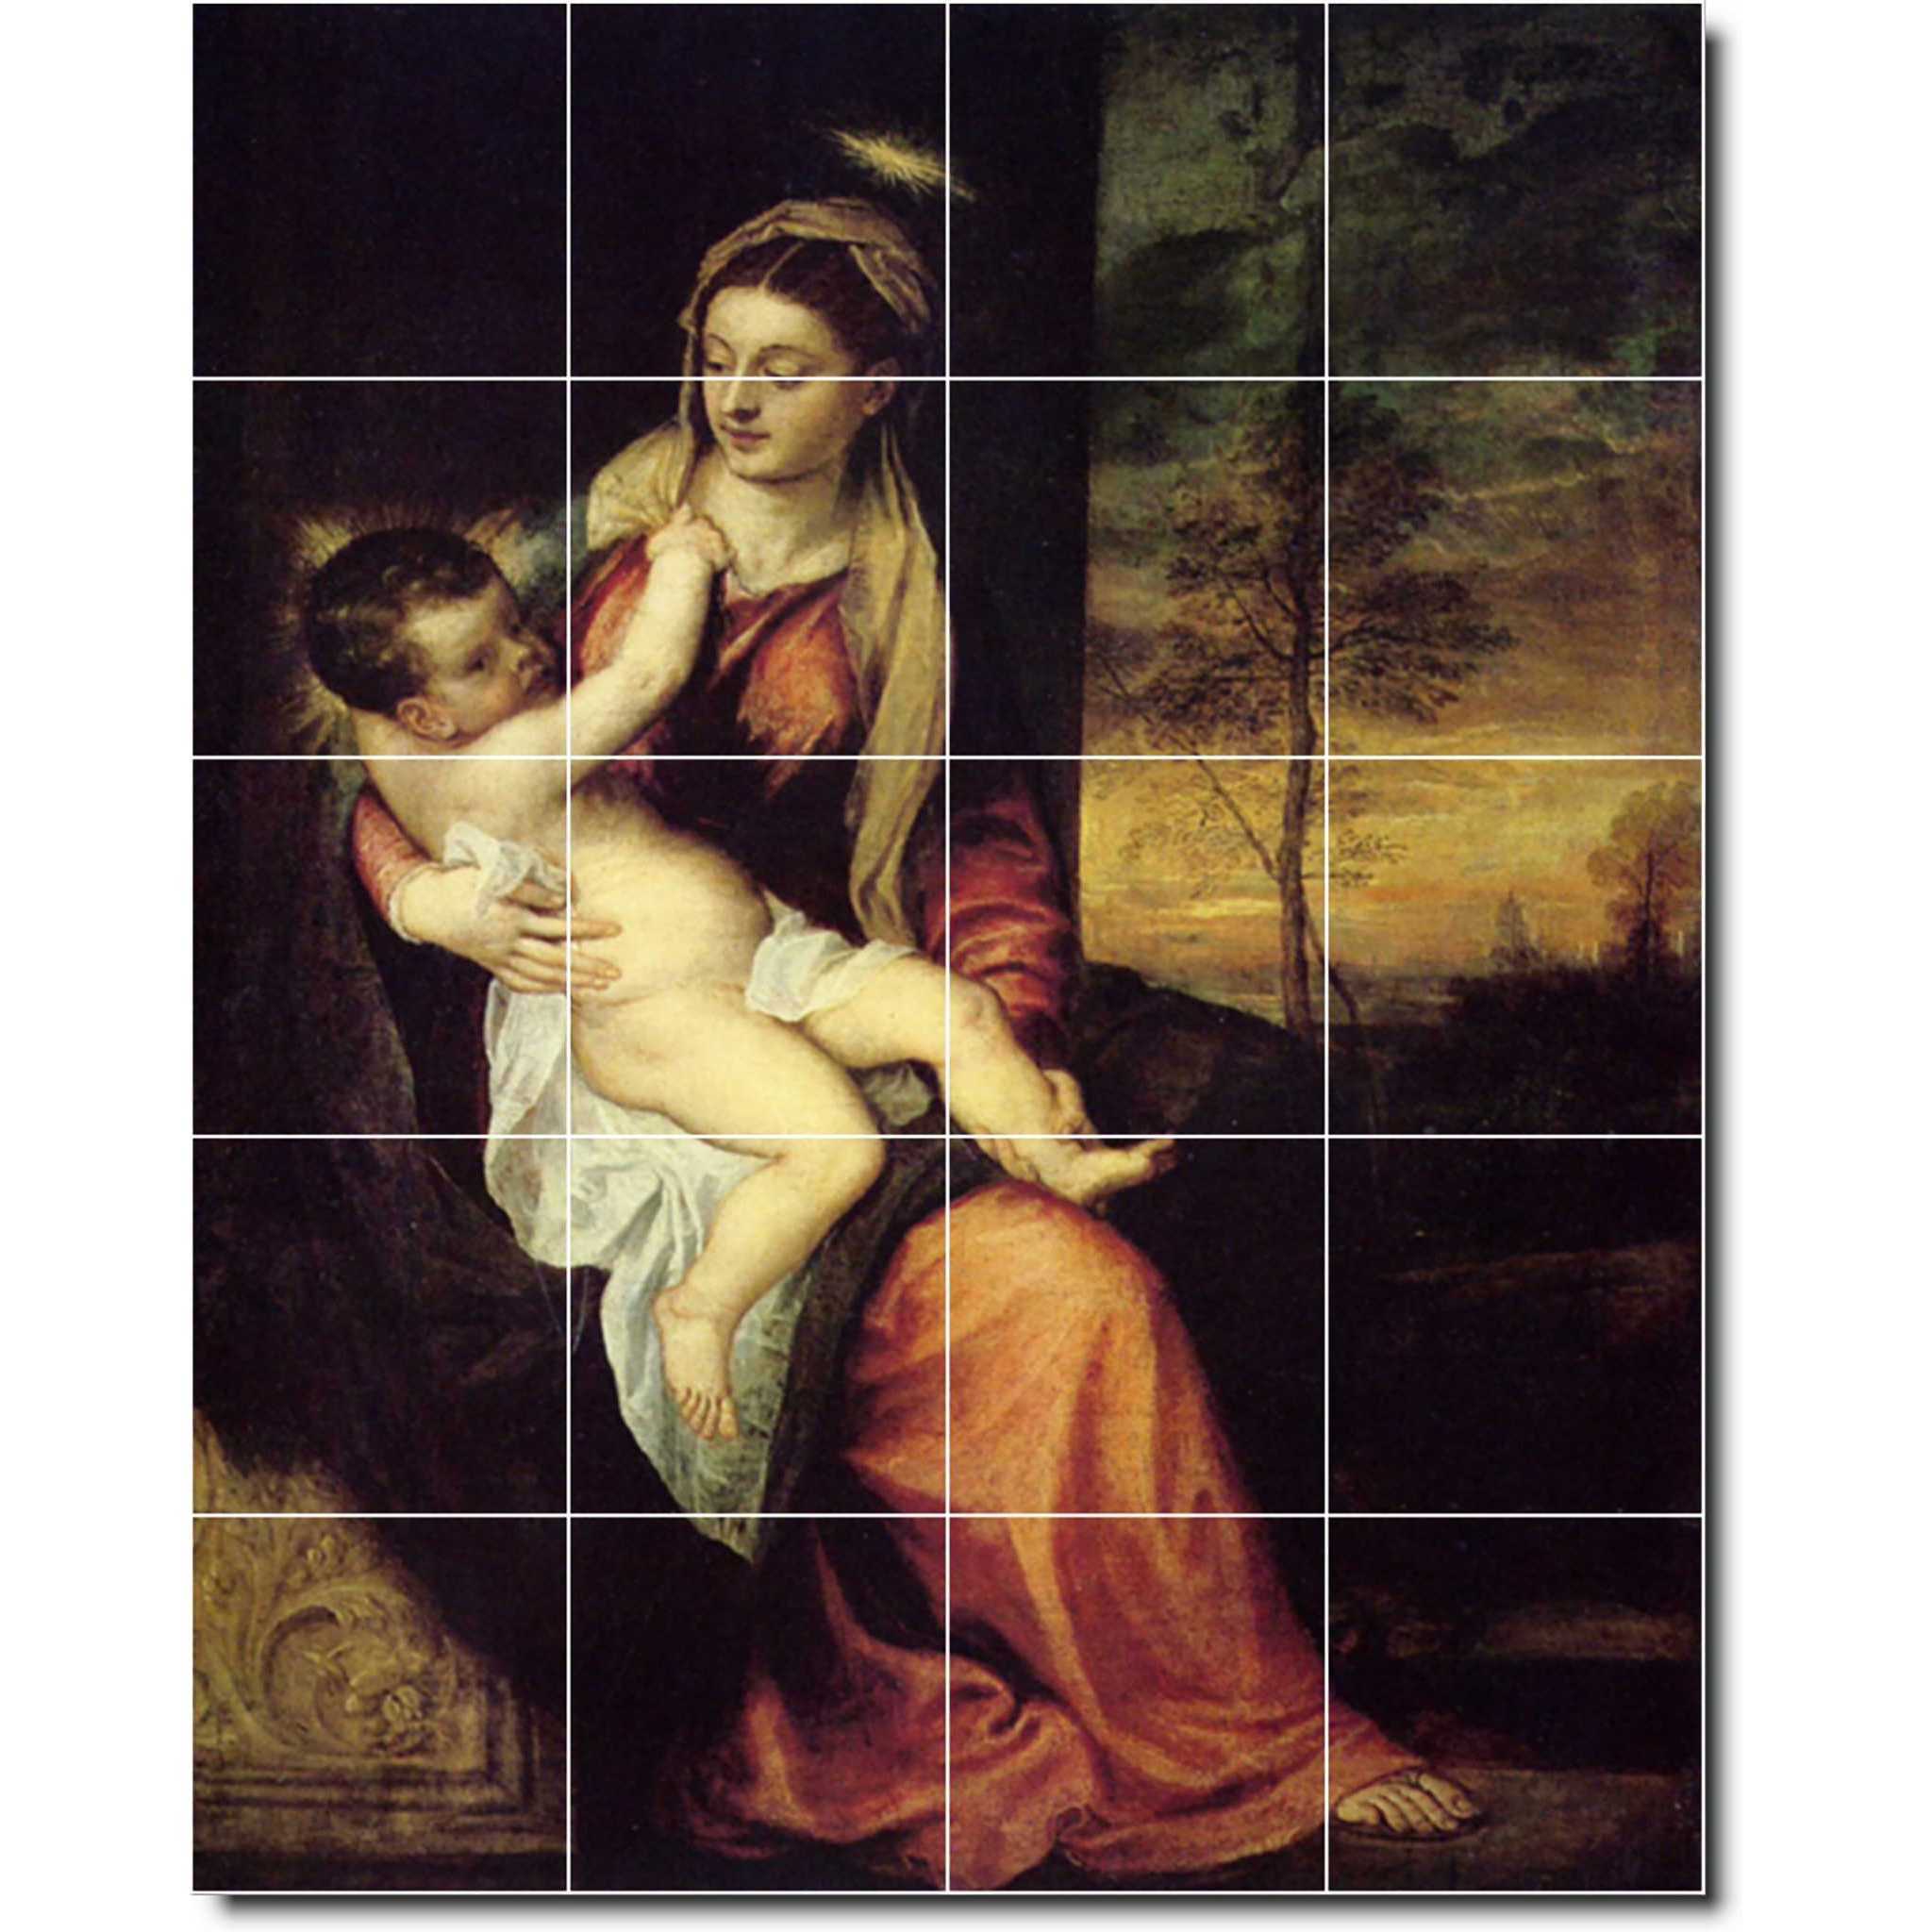 titian mother child painting ceramic tile mural p08705